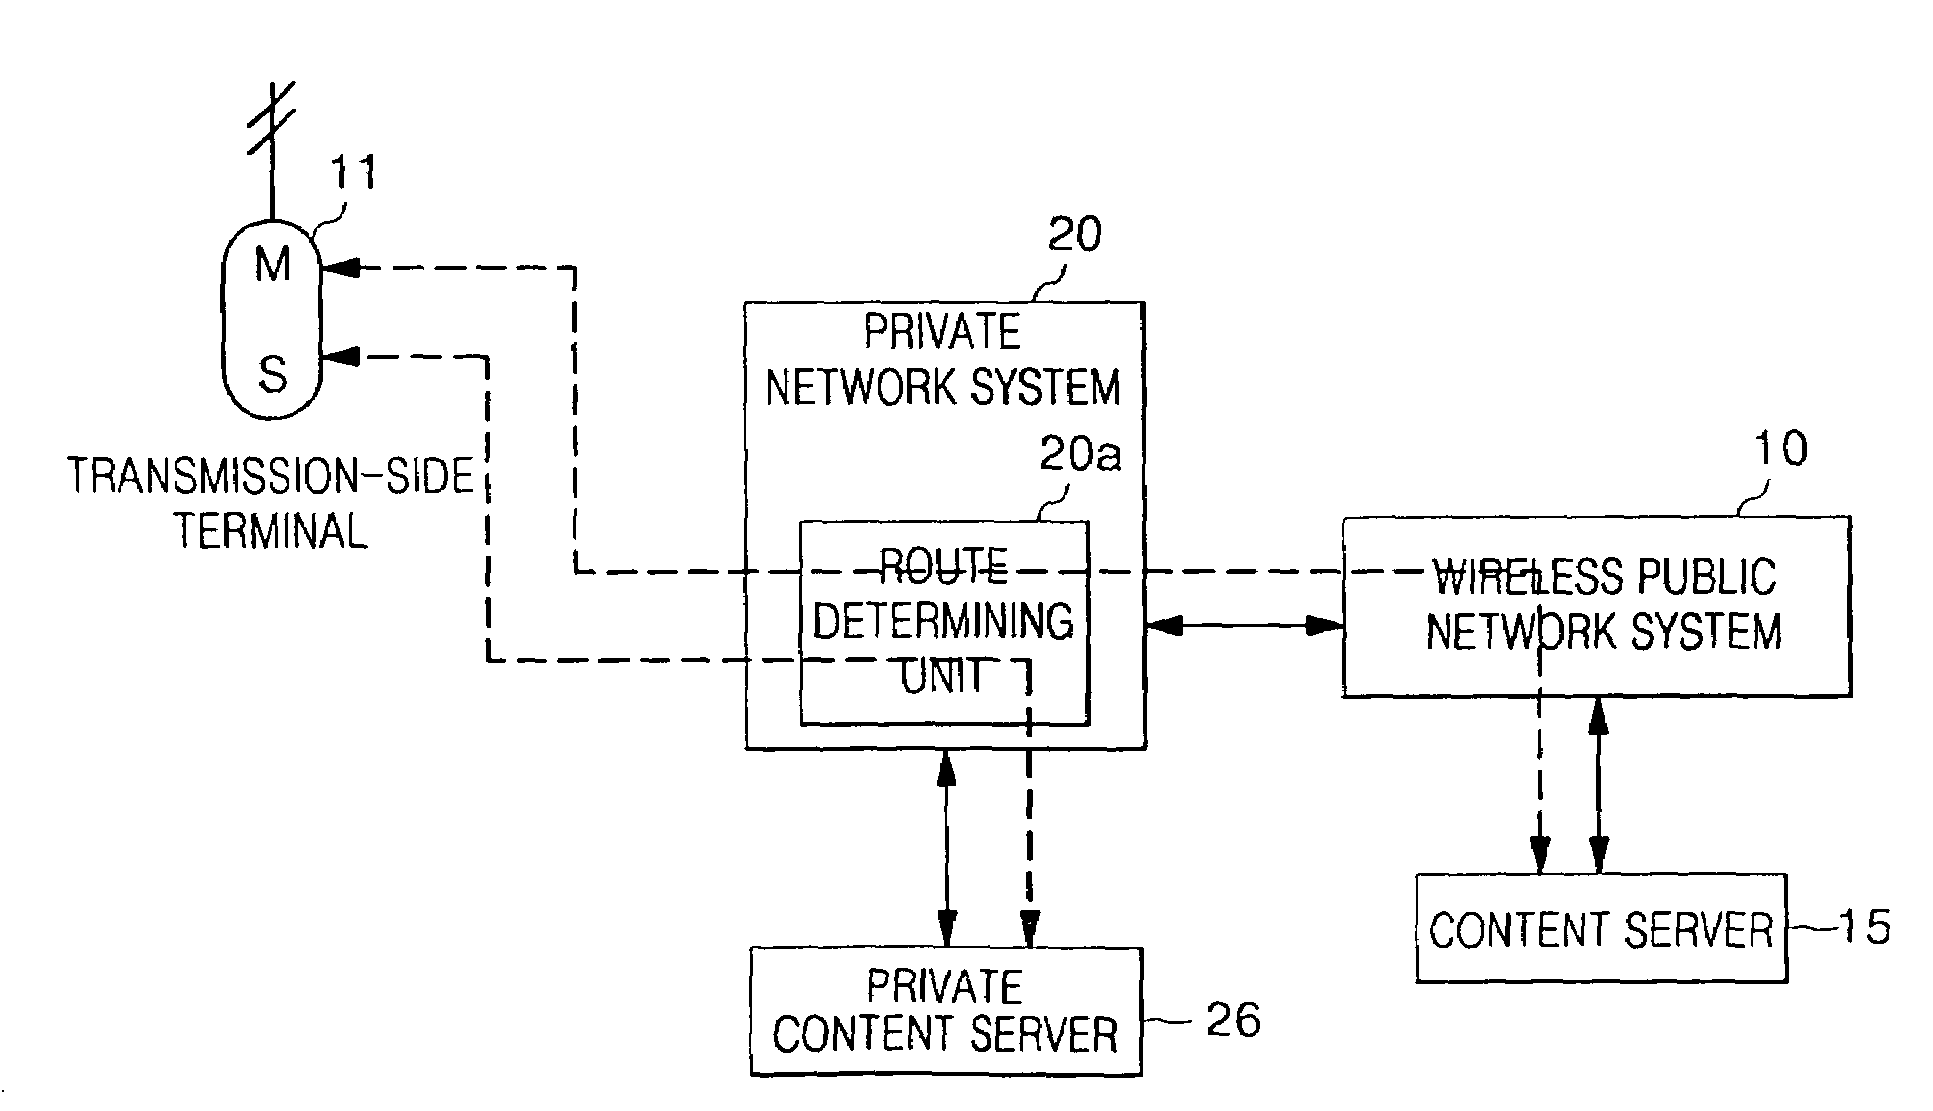 Method and system for providing data service in interworking wireless public and private networks